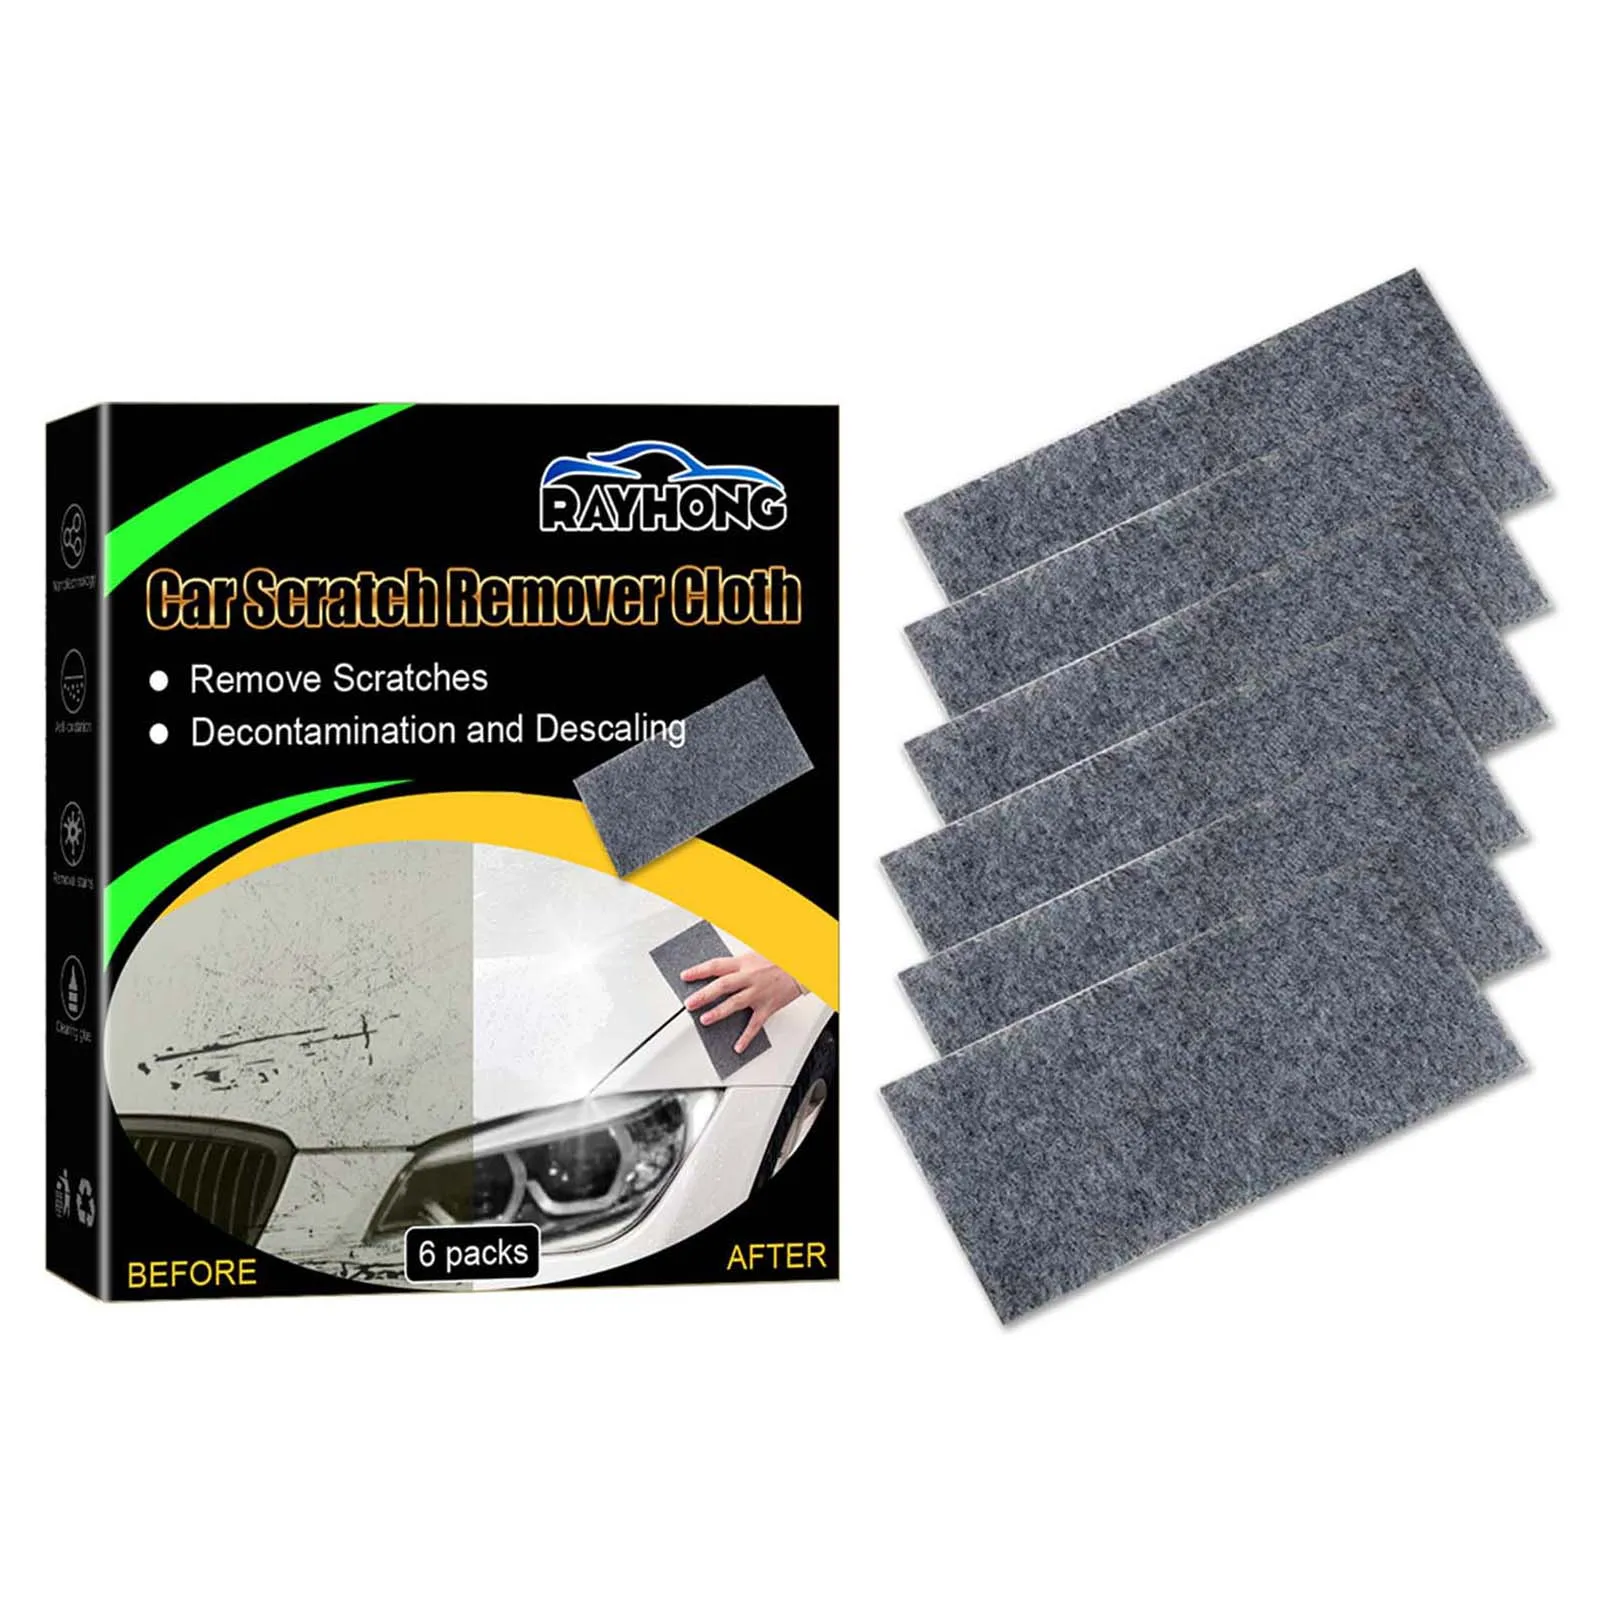 

Car Scratch Remover Cloth Easy to Repair Light Scratch Car Paint for New Year Friends Family Gift